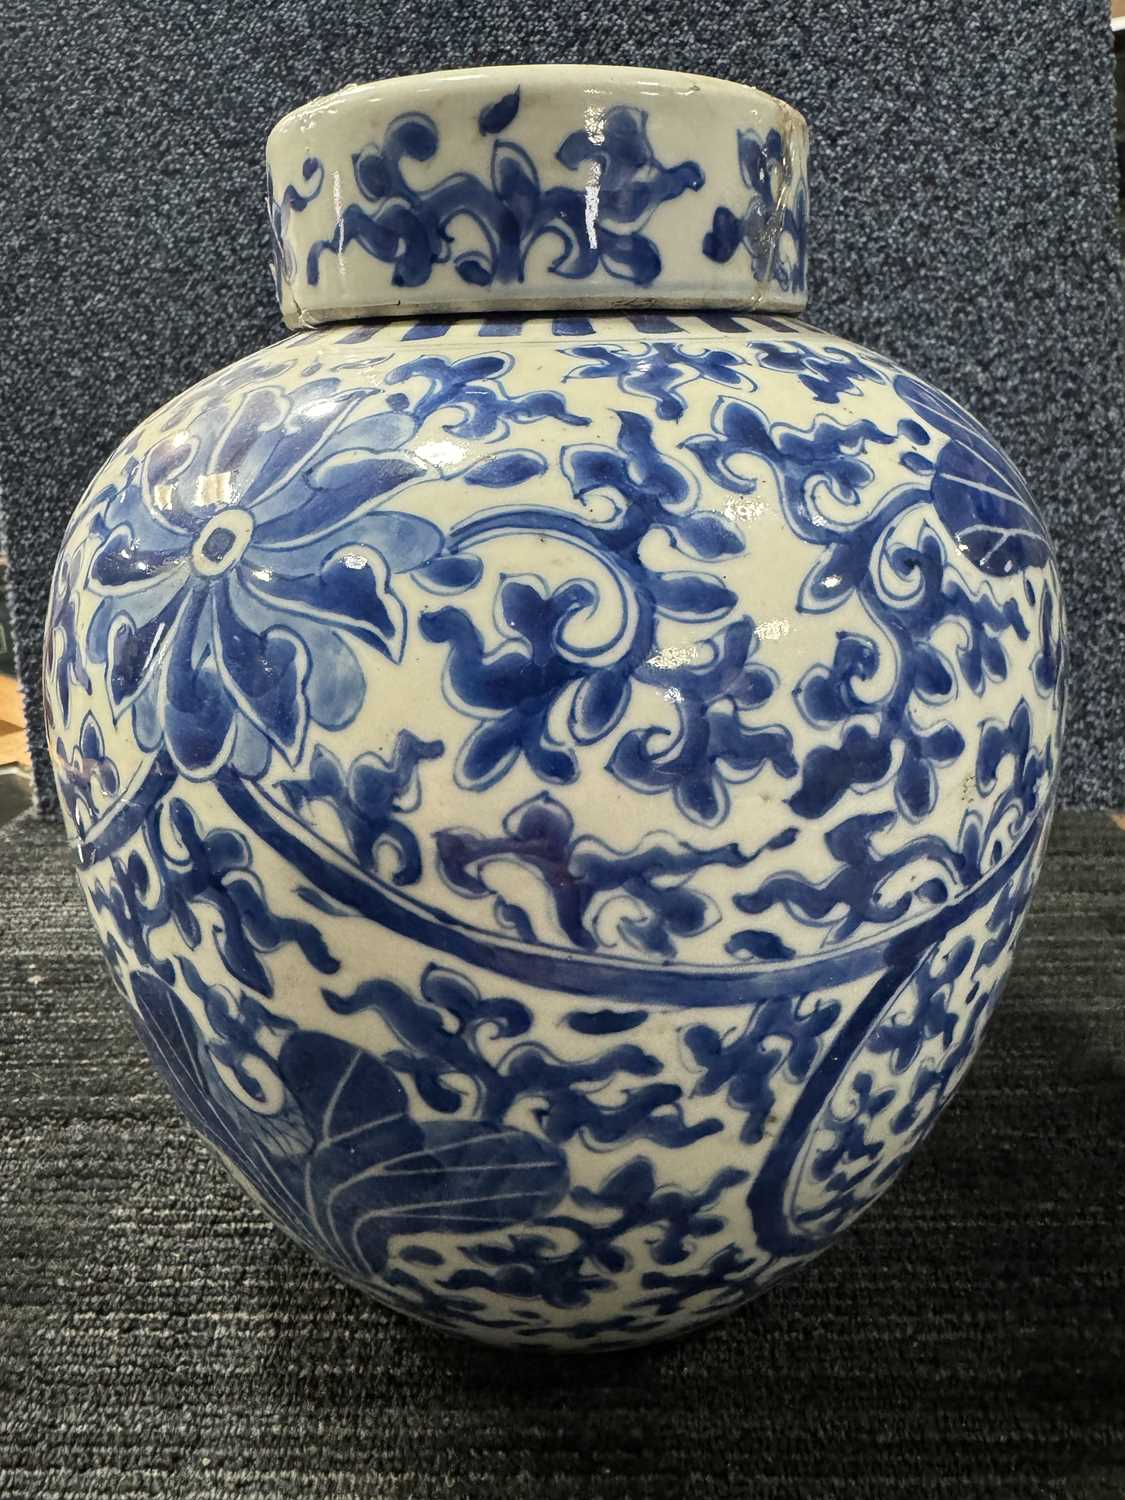 LATE 19TH/EARLY 20TH CENTURY CHINESE BLUE AND WHITE LIDDED GINGER JAR, GUANGXU PERIOD (1875-1908) - Image 6 of 9